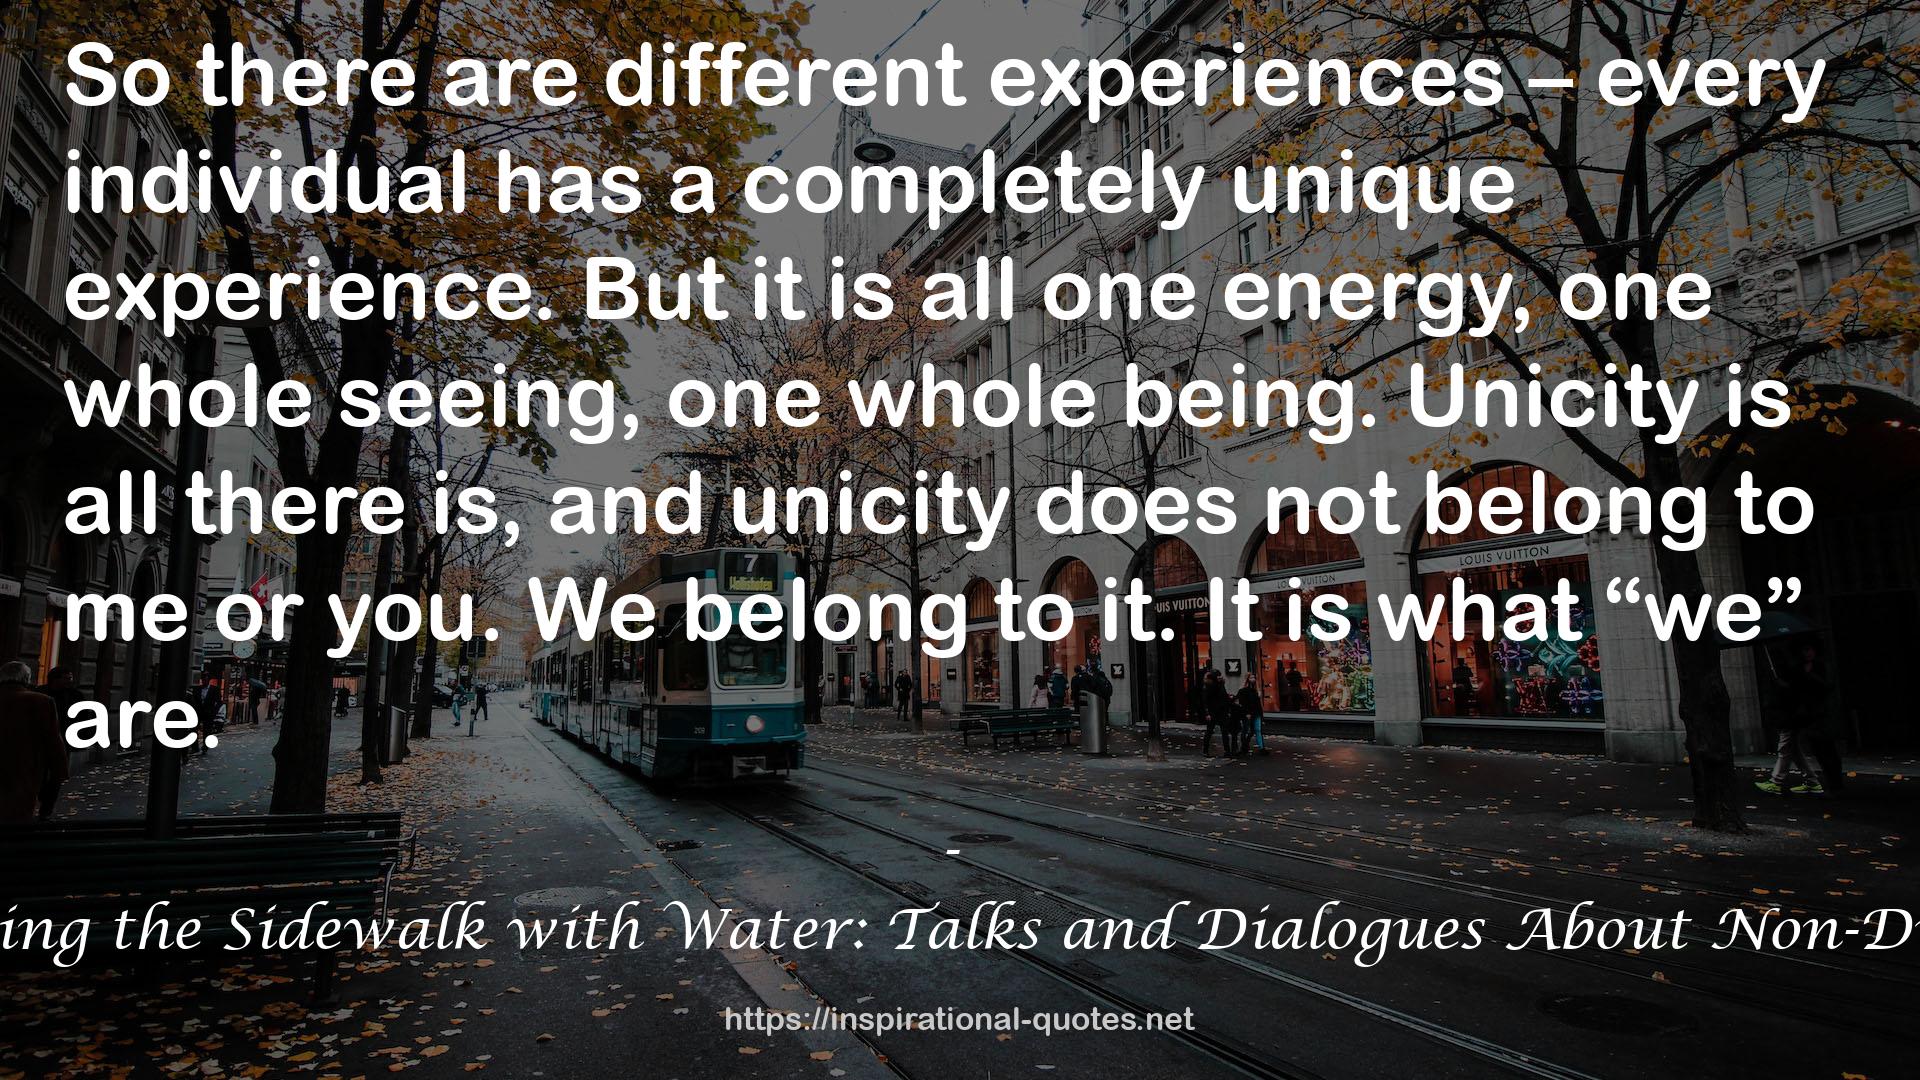 Painting the Sidewalk with Water: Talks and Dialogues About Non-Duality QUOTES